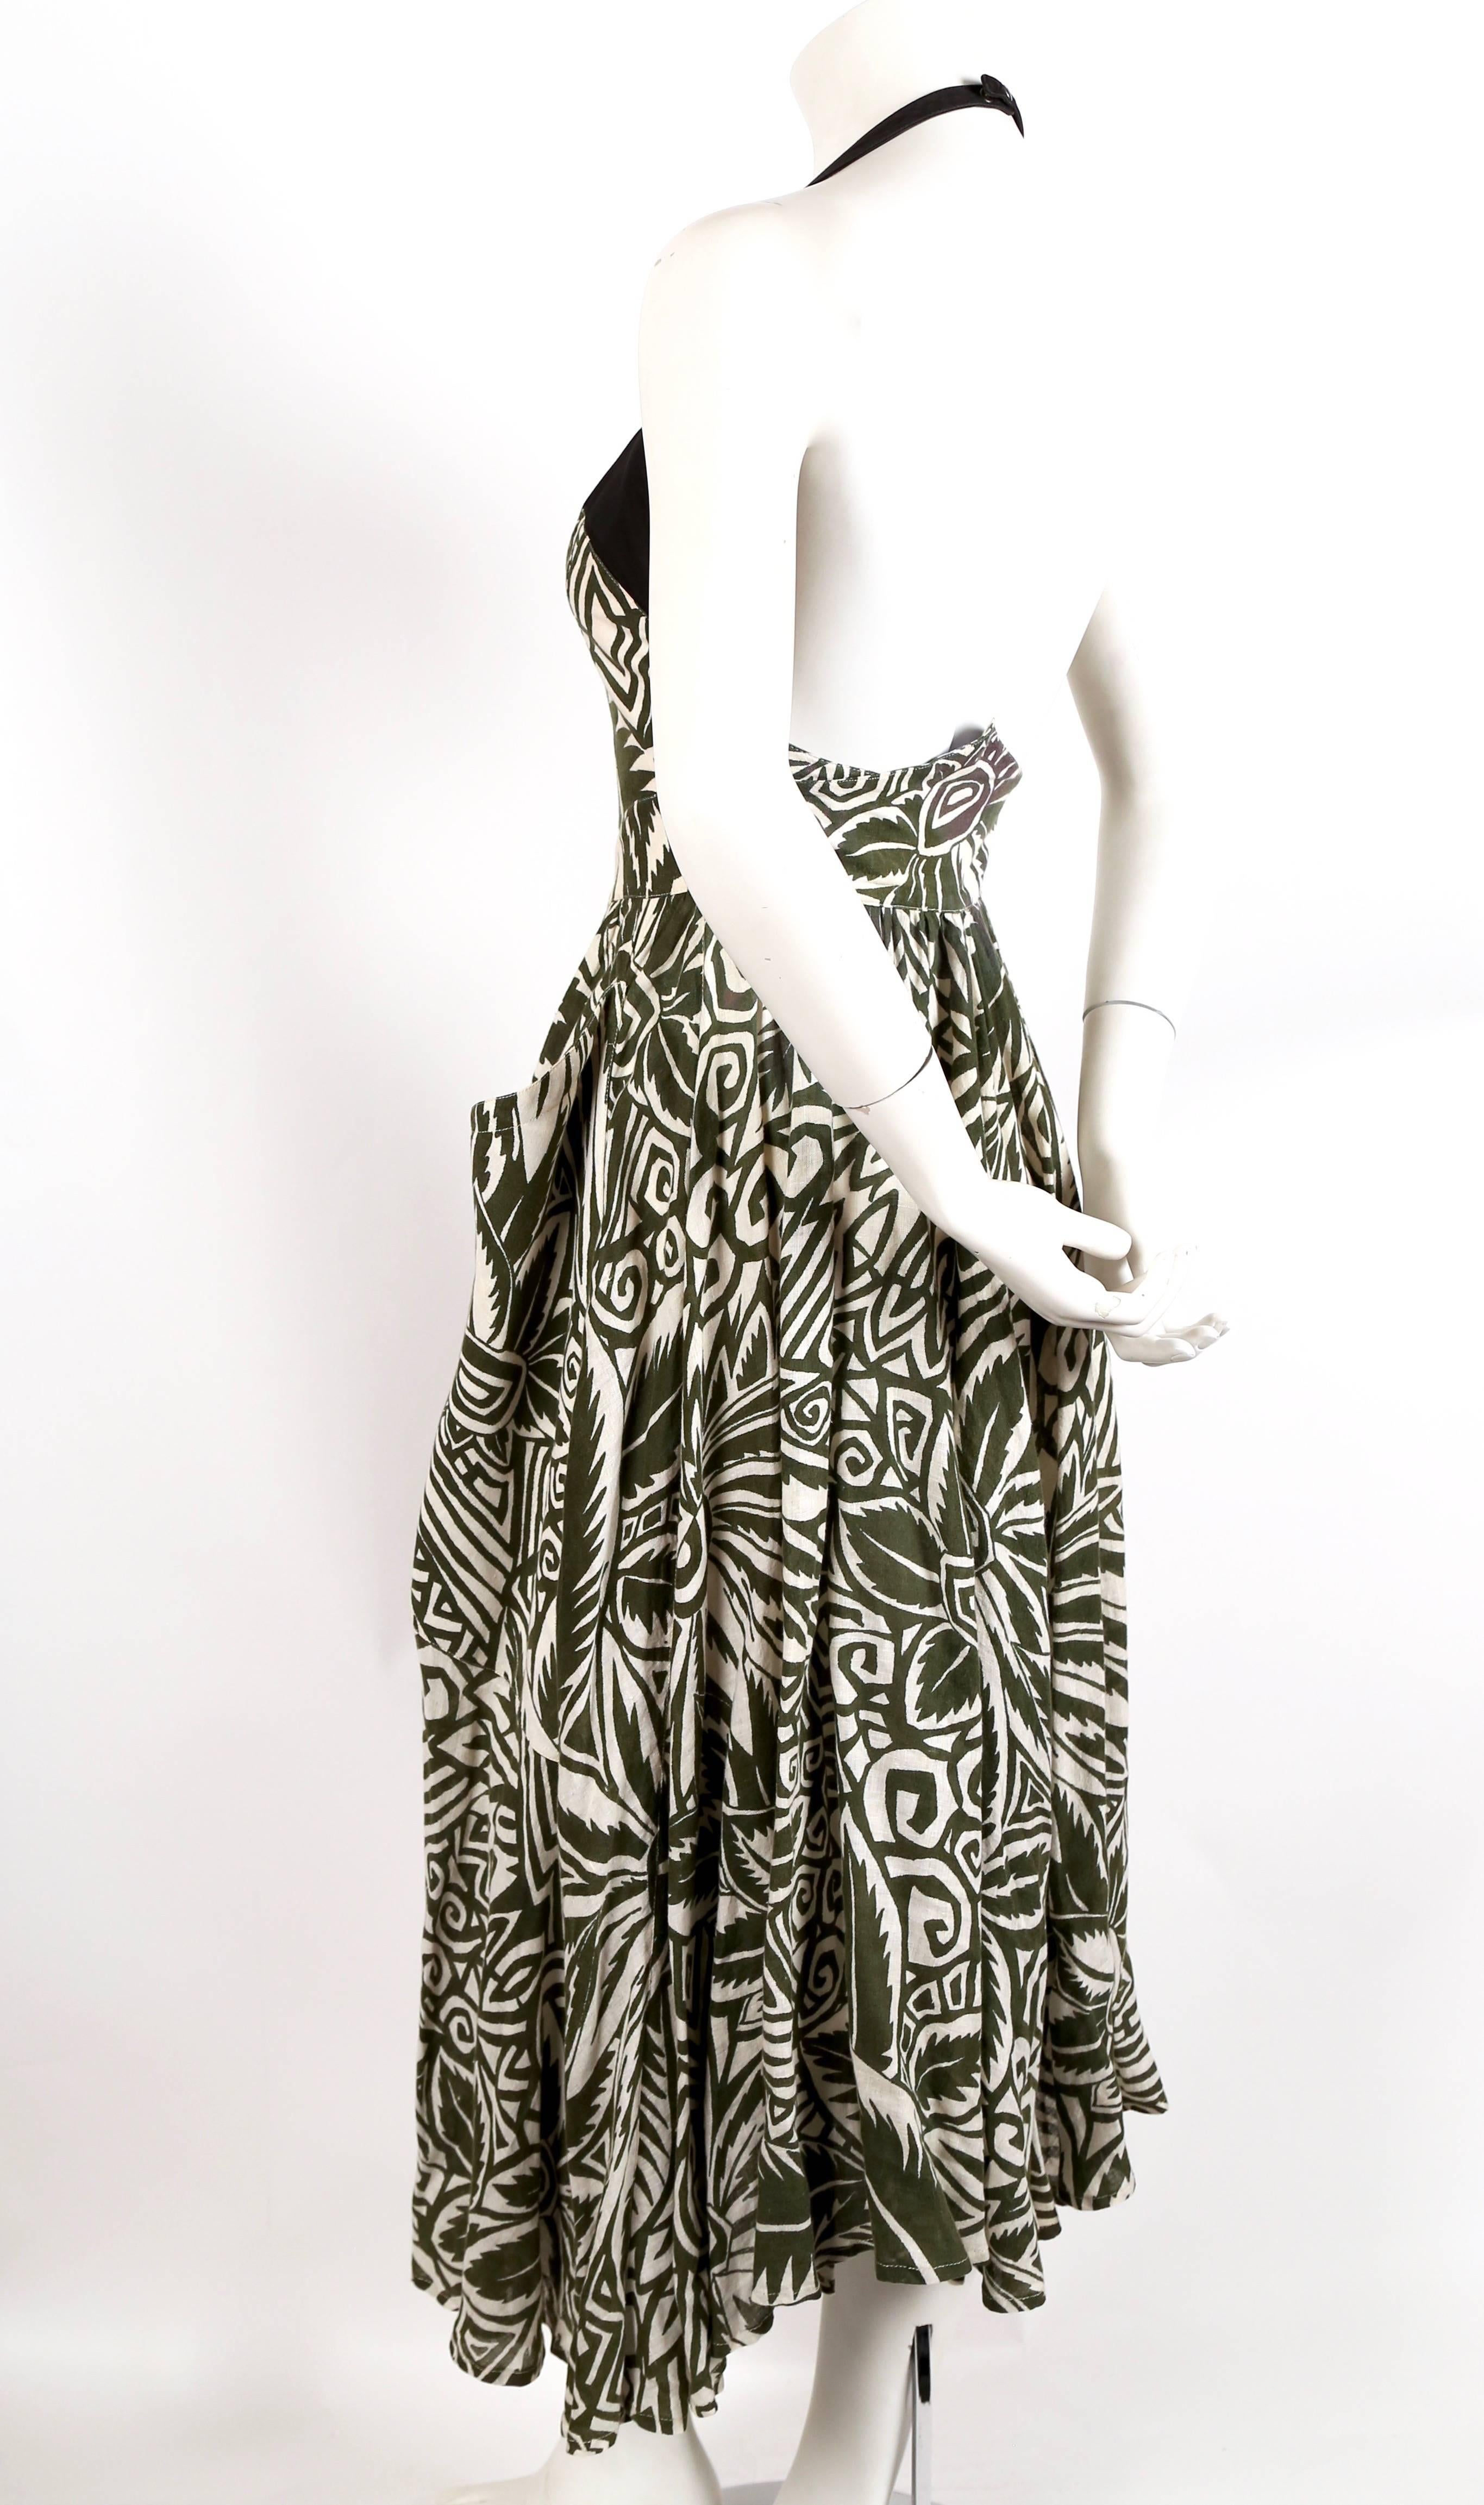 Green floral printed cotton dress with black halter neck, large wrap around patch pockets and snap front closure from Thierry Mugler dating to the 1990's. Hem has an interesting asymmetrical shape with the sides falling longer than the front and